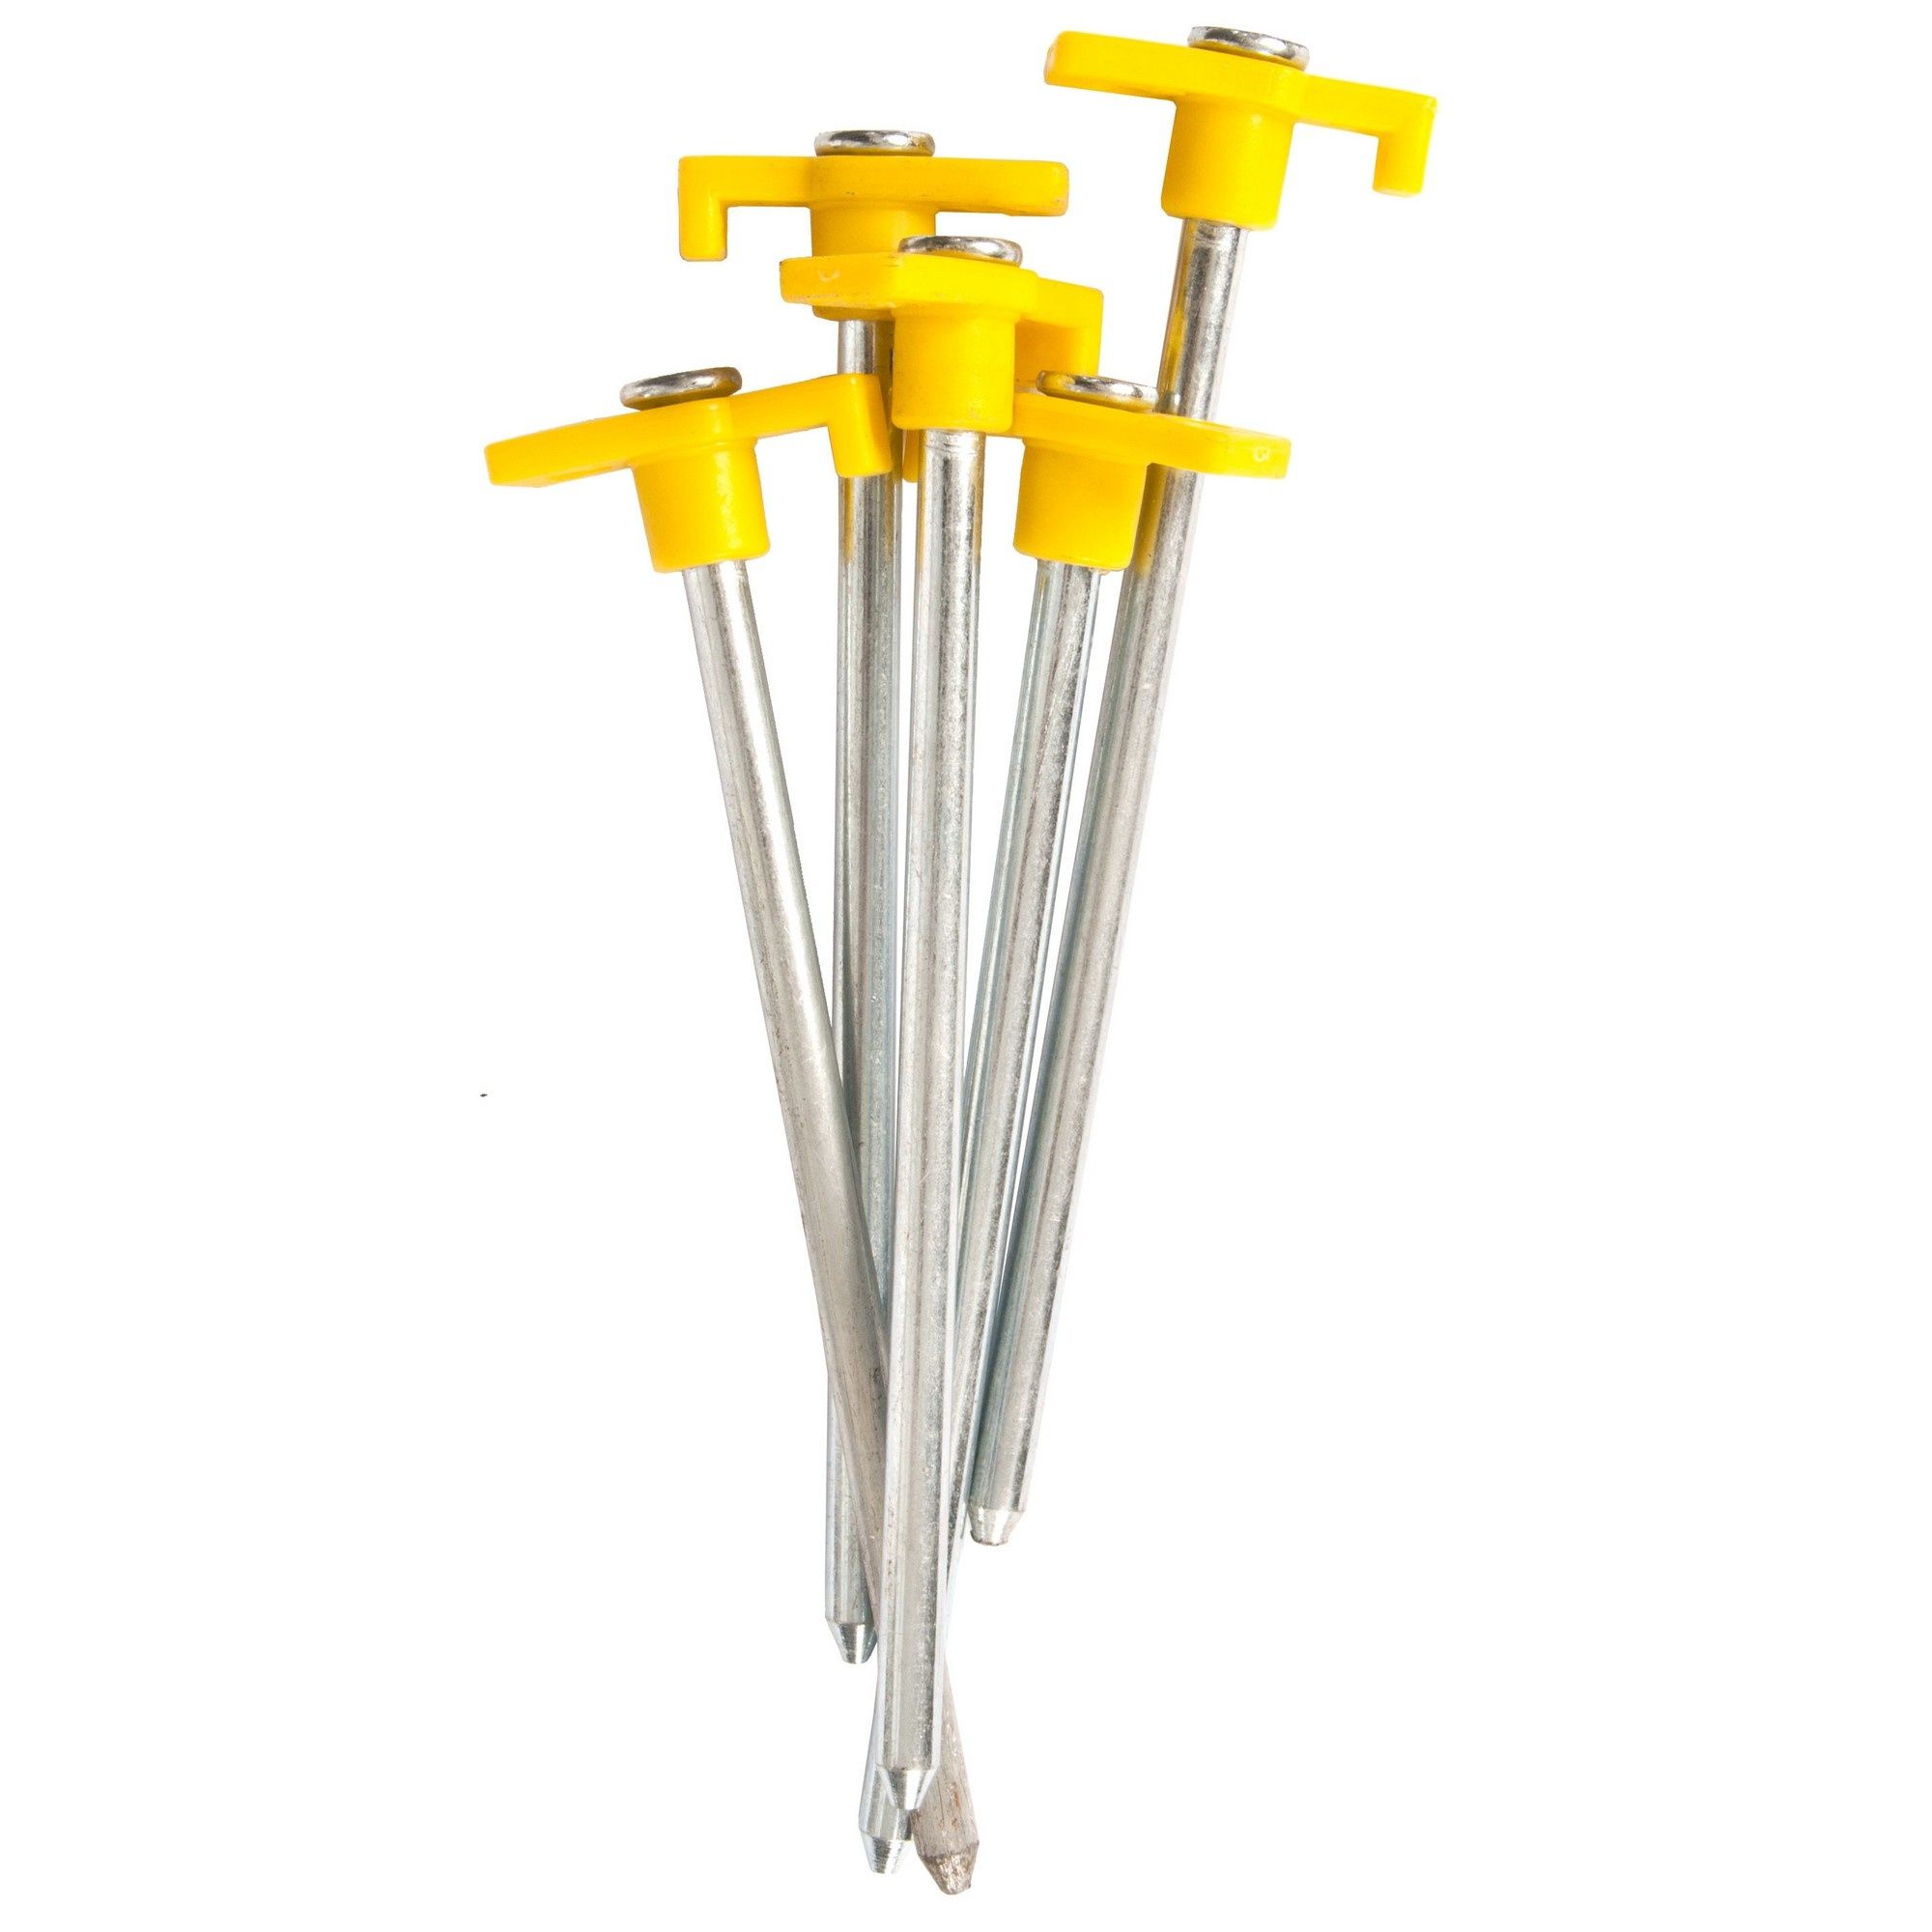 5 x Steel tent pegs. For hard ground. 180mm x 8mm.